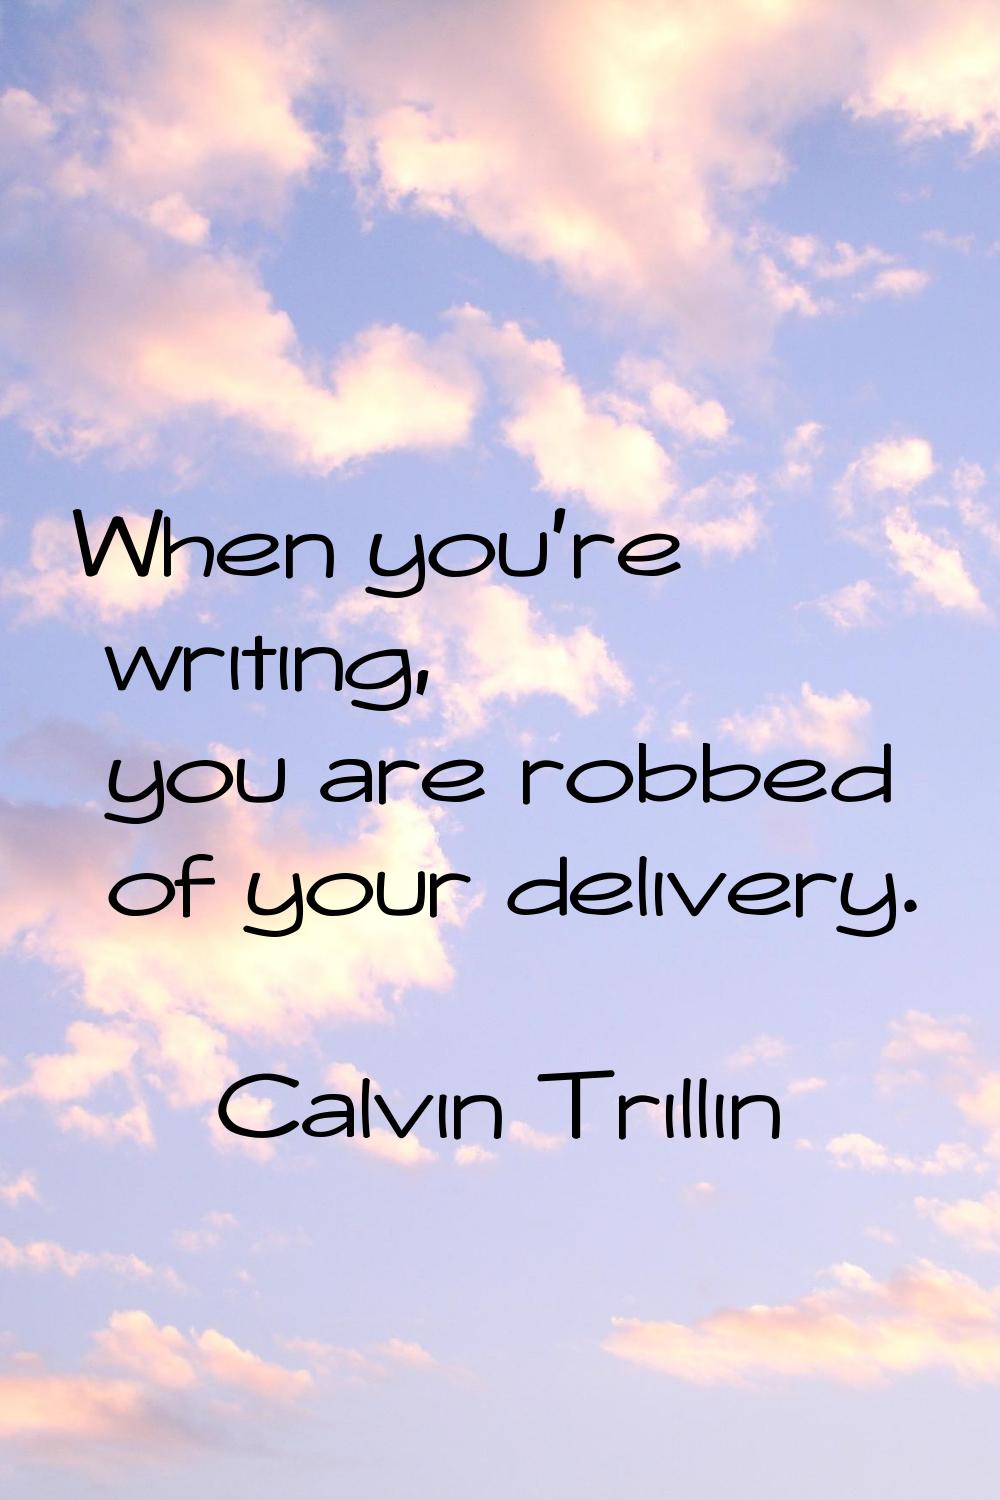 When you're writing, you are robbed of your delivery.